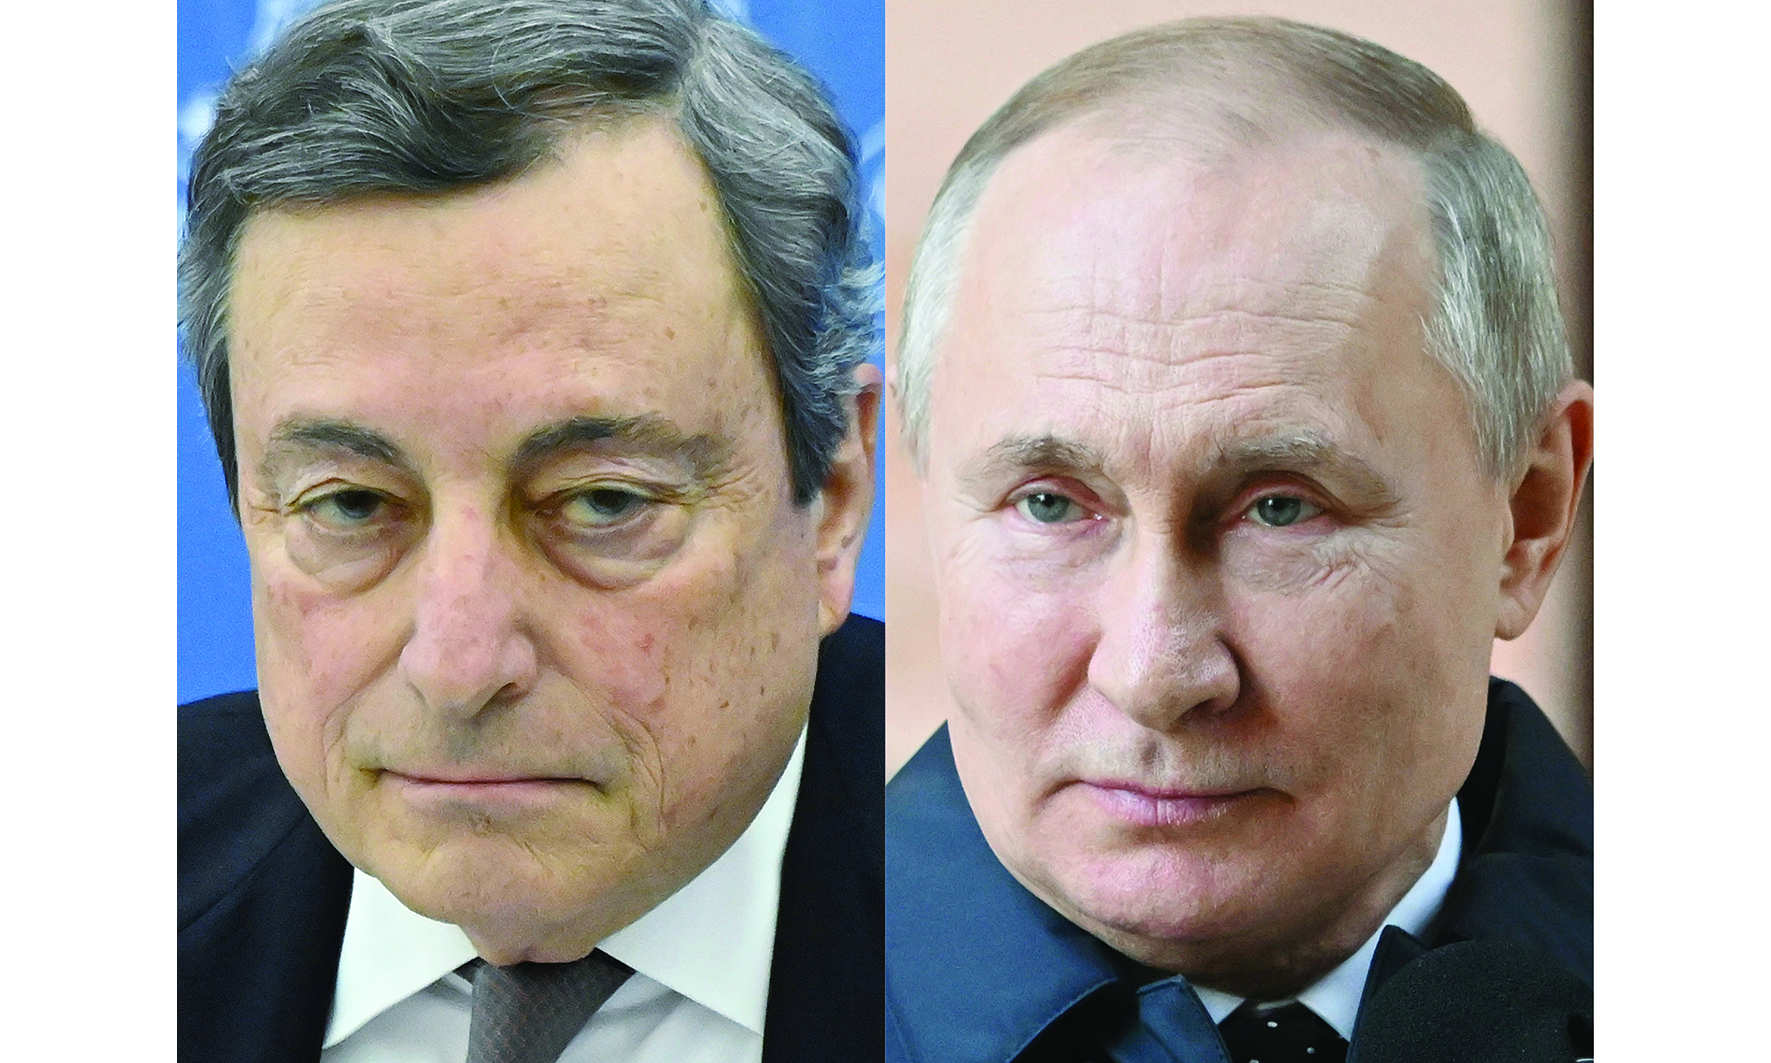 MOSCIW: This combination of pictures shows Italy's Prime Minister Mario Draghi (left) and Russian President Vladimir Putin.-AFPnn